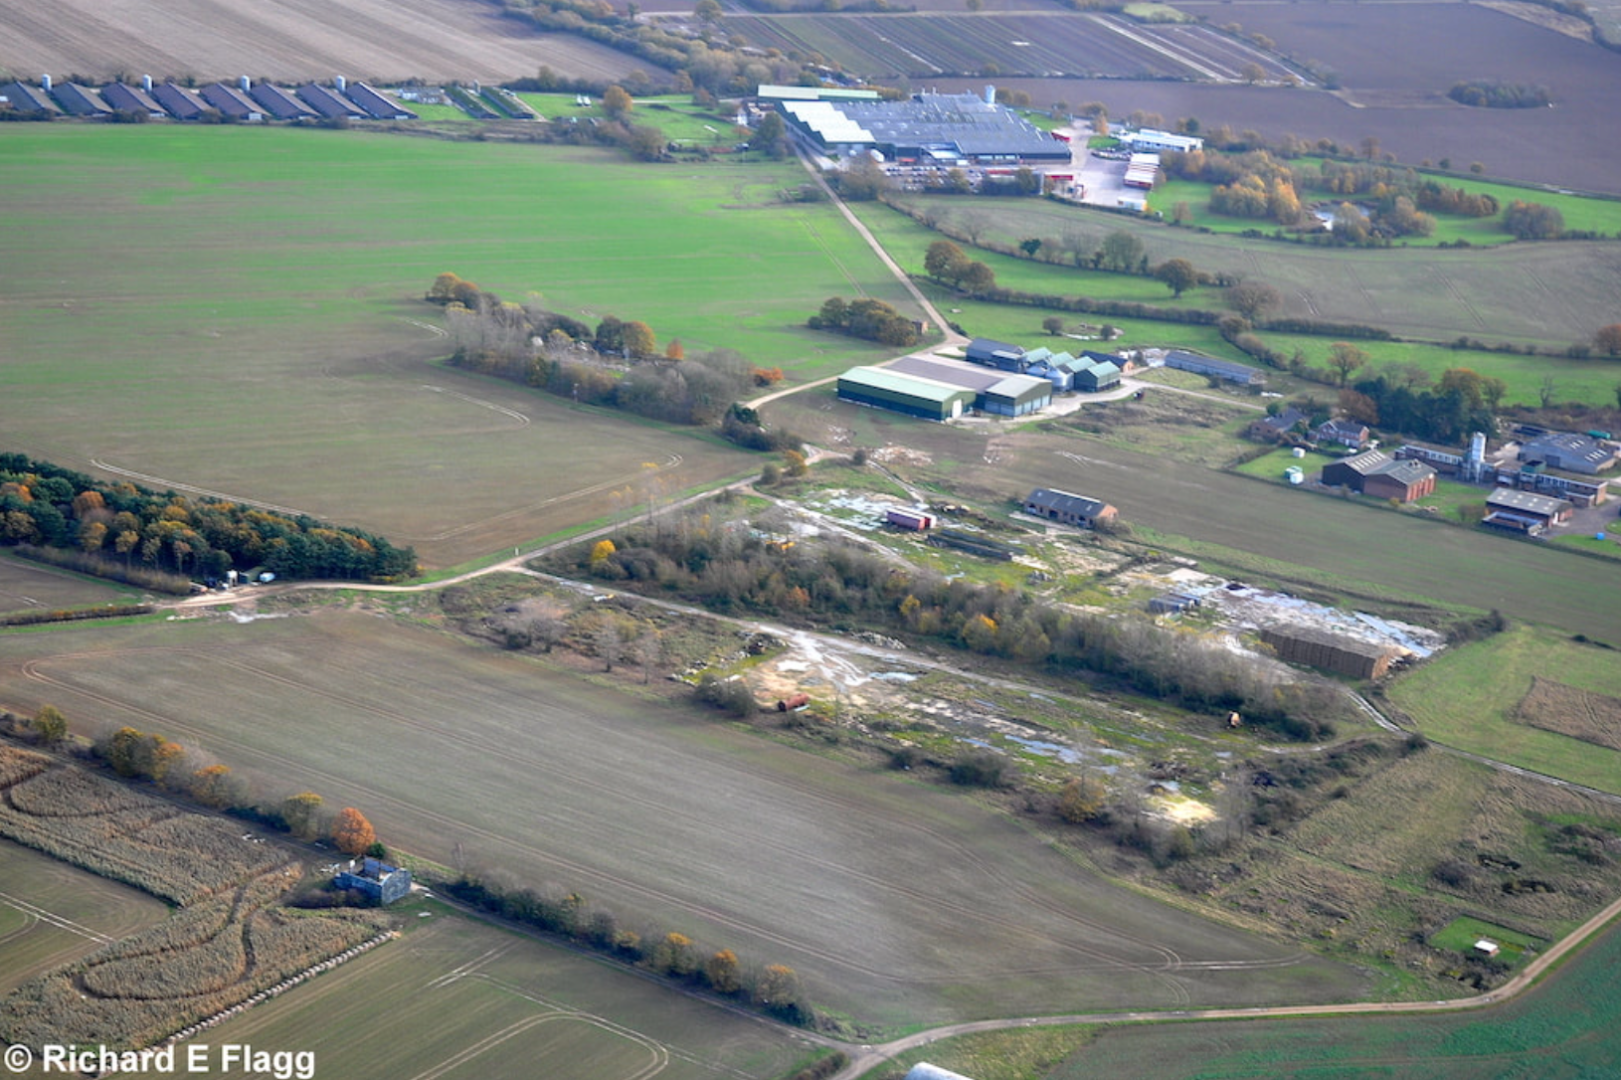 007Aerial View of Pulham St Mary Airship Station - 17 November 2009.png